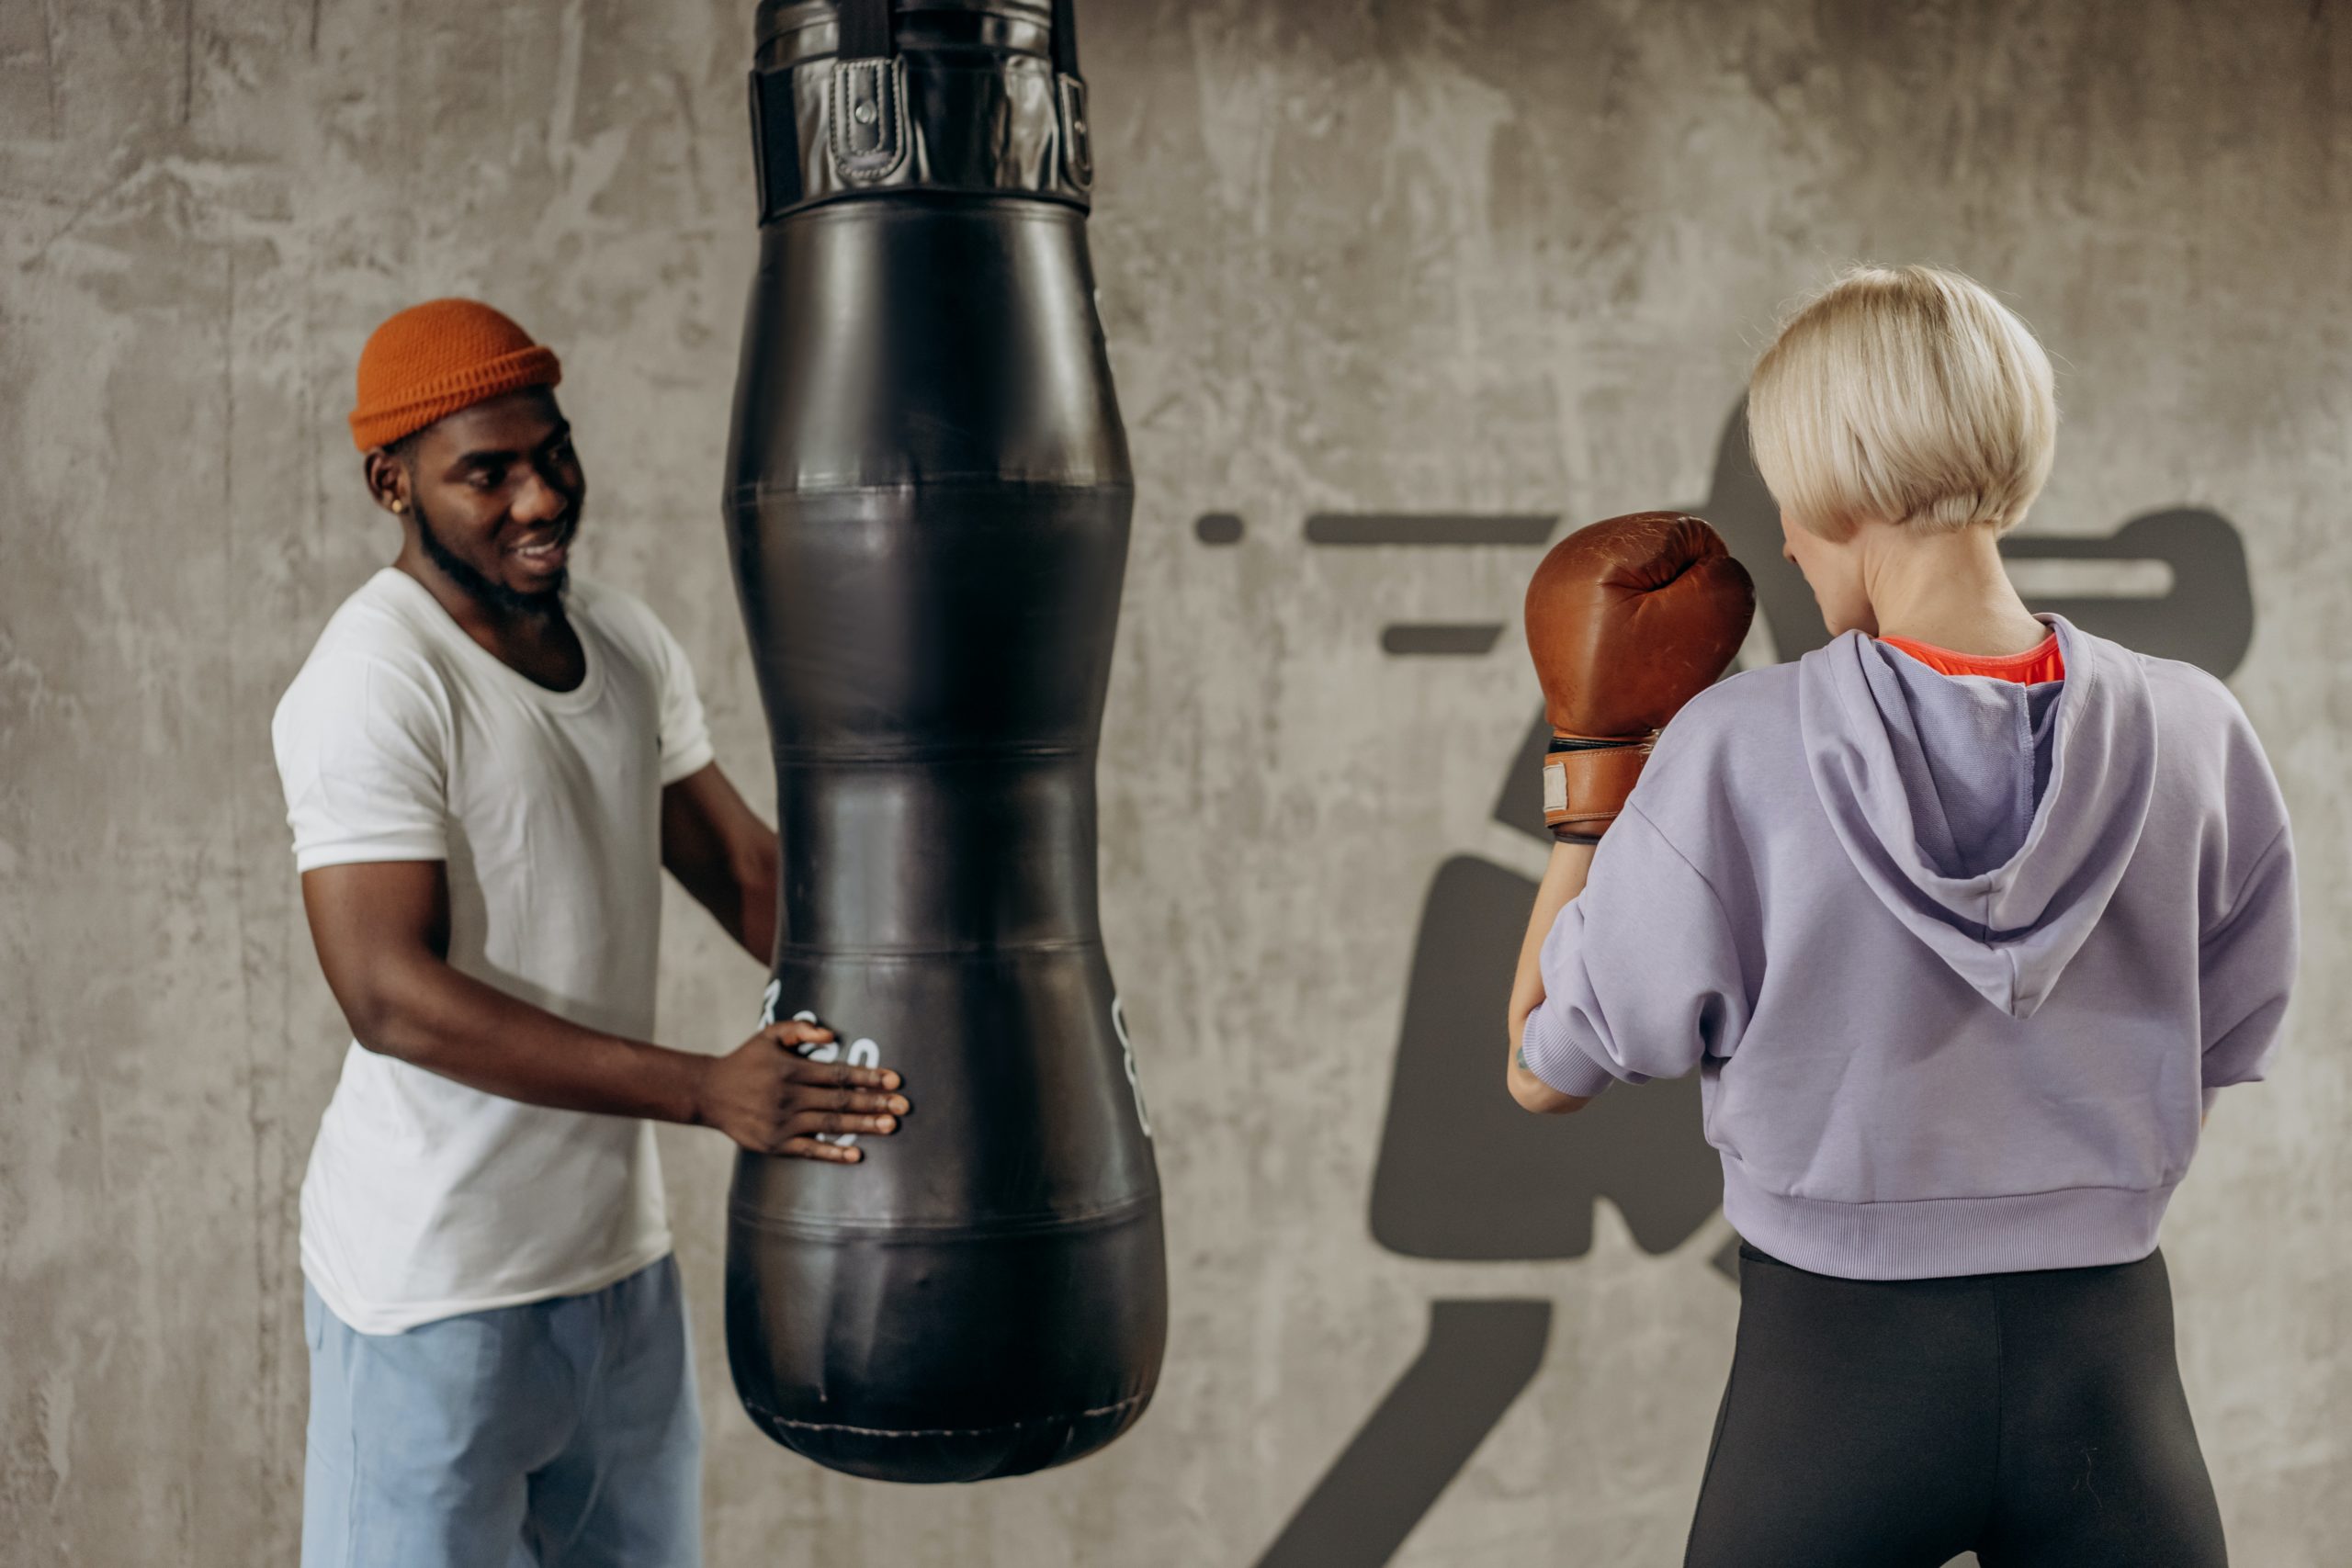 For anyone in LA that has never thought to try a boxing class but enjoys group HIIT workouts, I highly recommend checking out one of these boxing studios. #gymbox #bestgym #gymslosangeles #losangelesathleticclub #gold'sgym #bestgymsinlosangeles